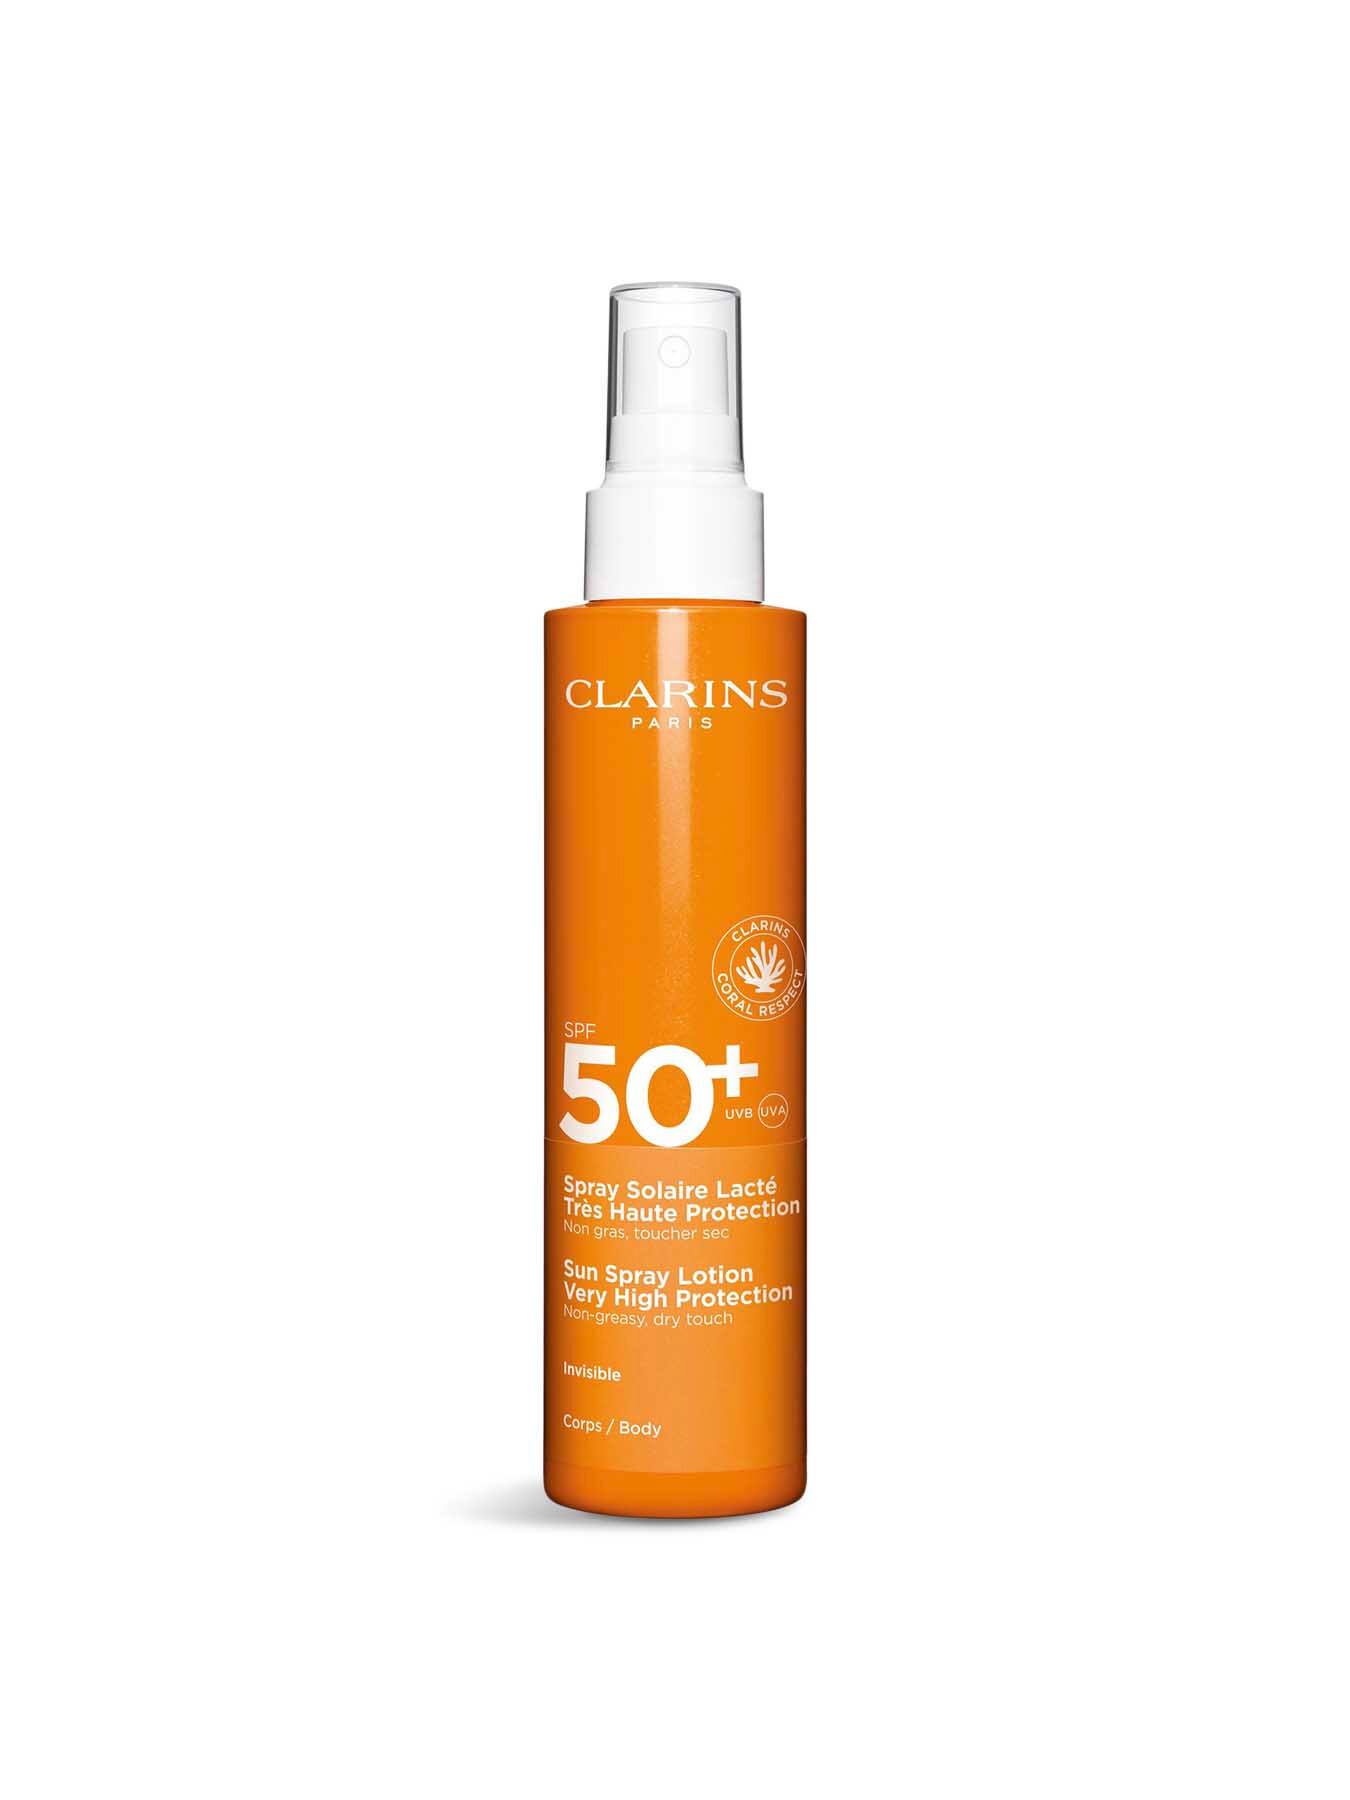 Clarins Sun Spray Lotion Very High Protection Spf50 In White